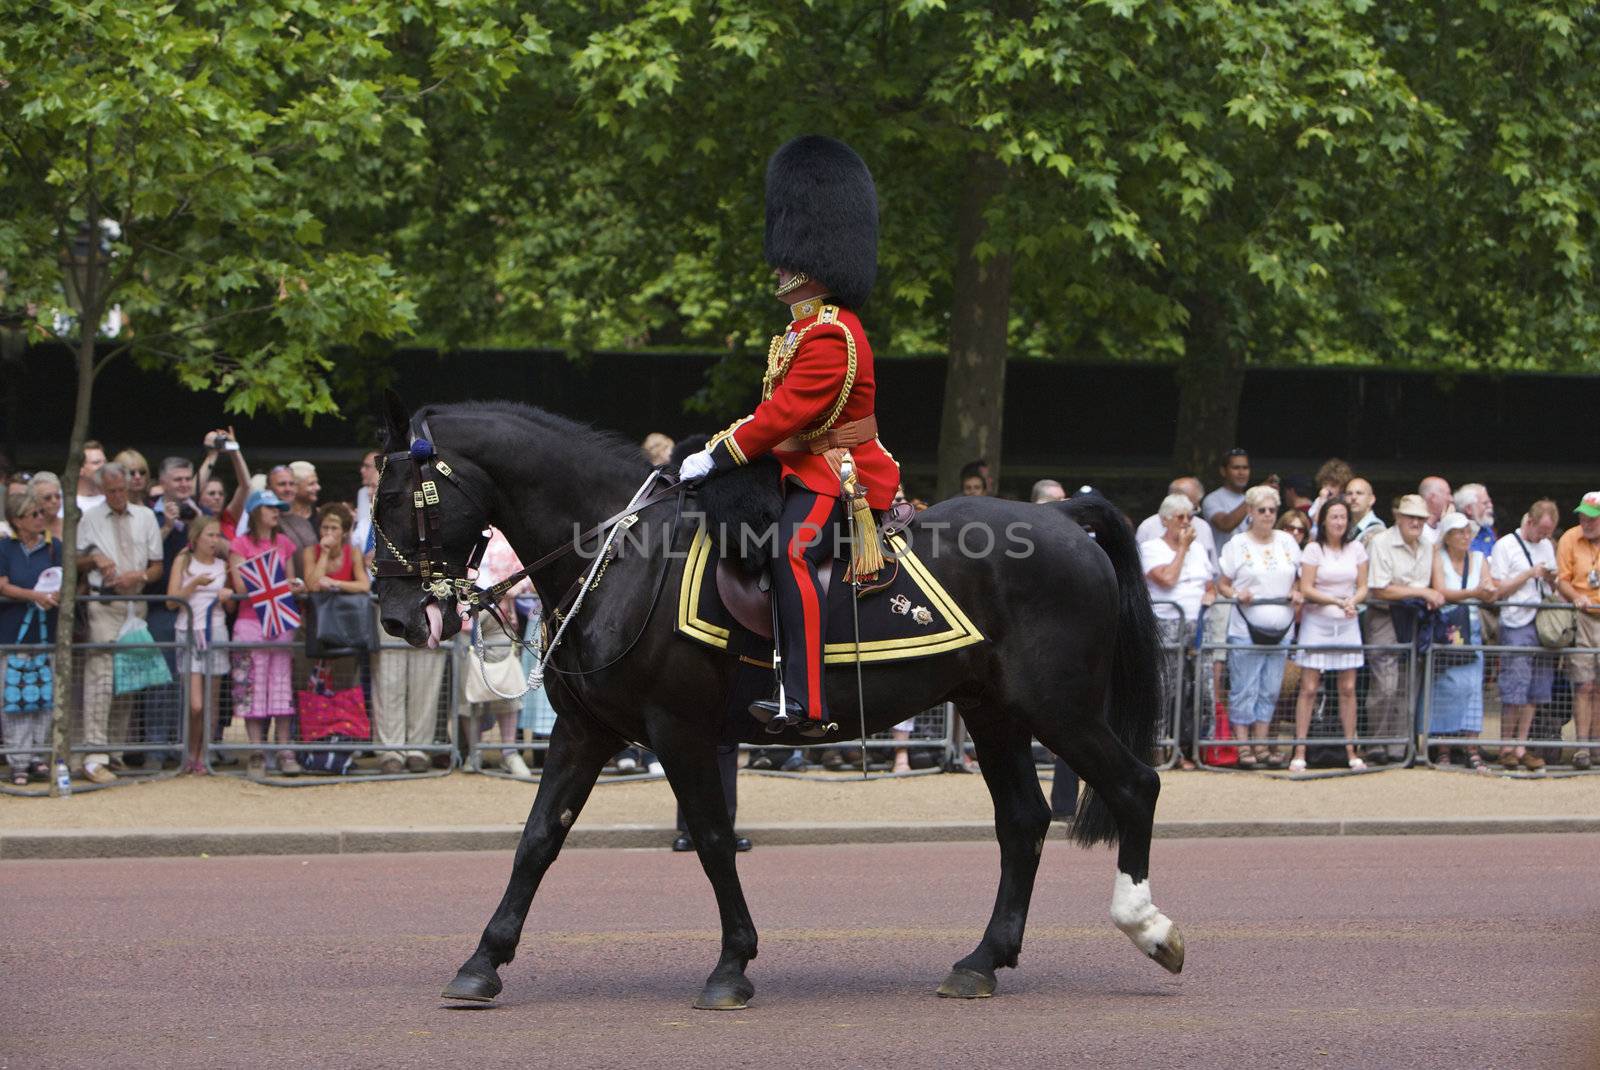 London royal guards at the Trooping of the Colour